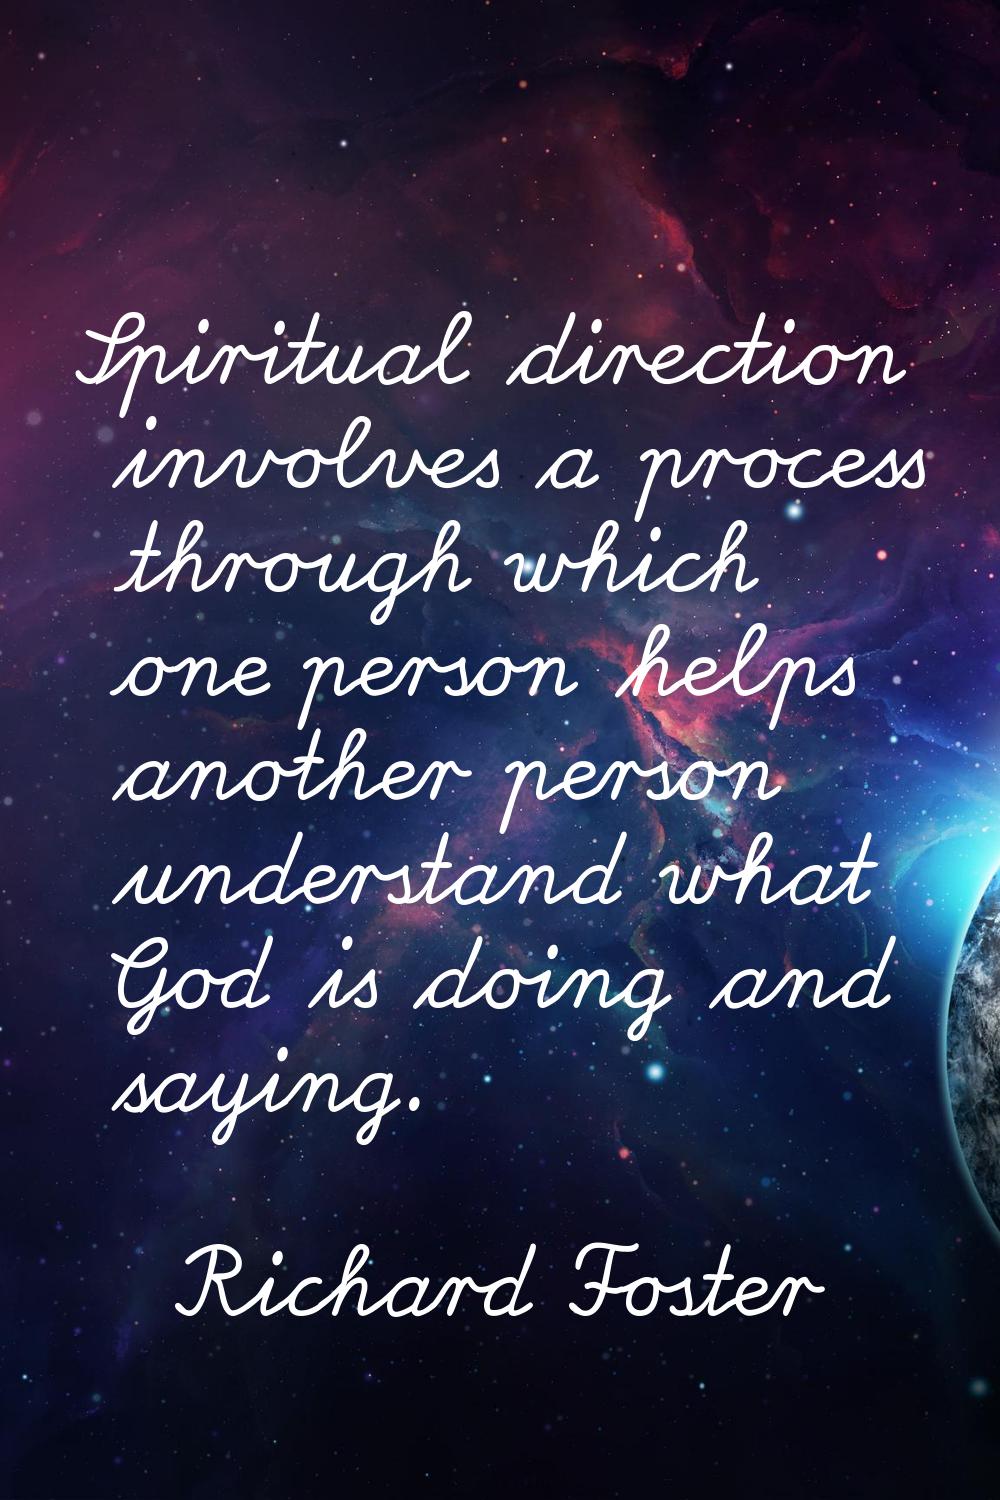 Spiritual direction involves a process through which one person helps another person understand wha